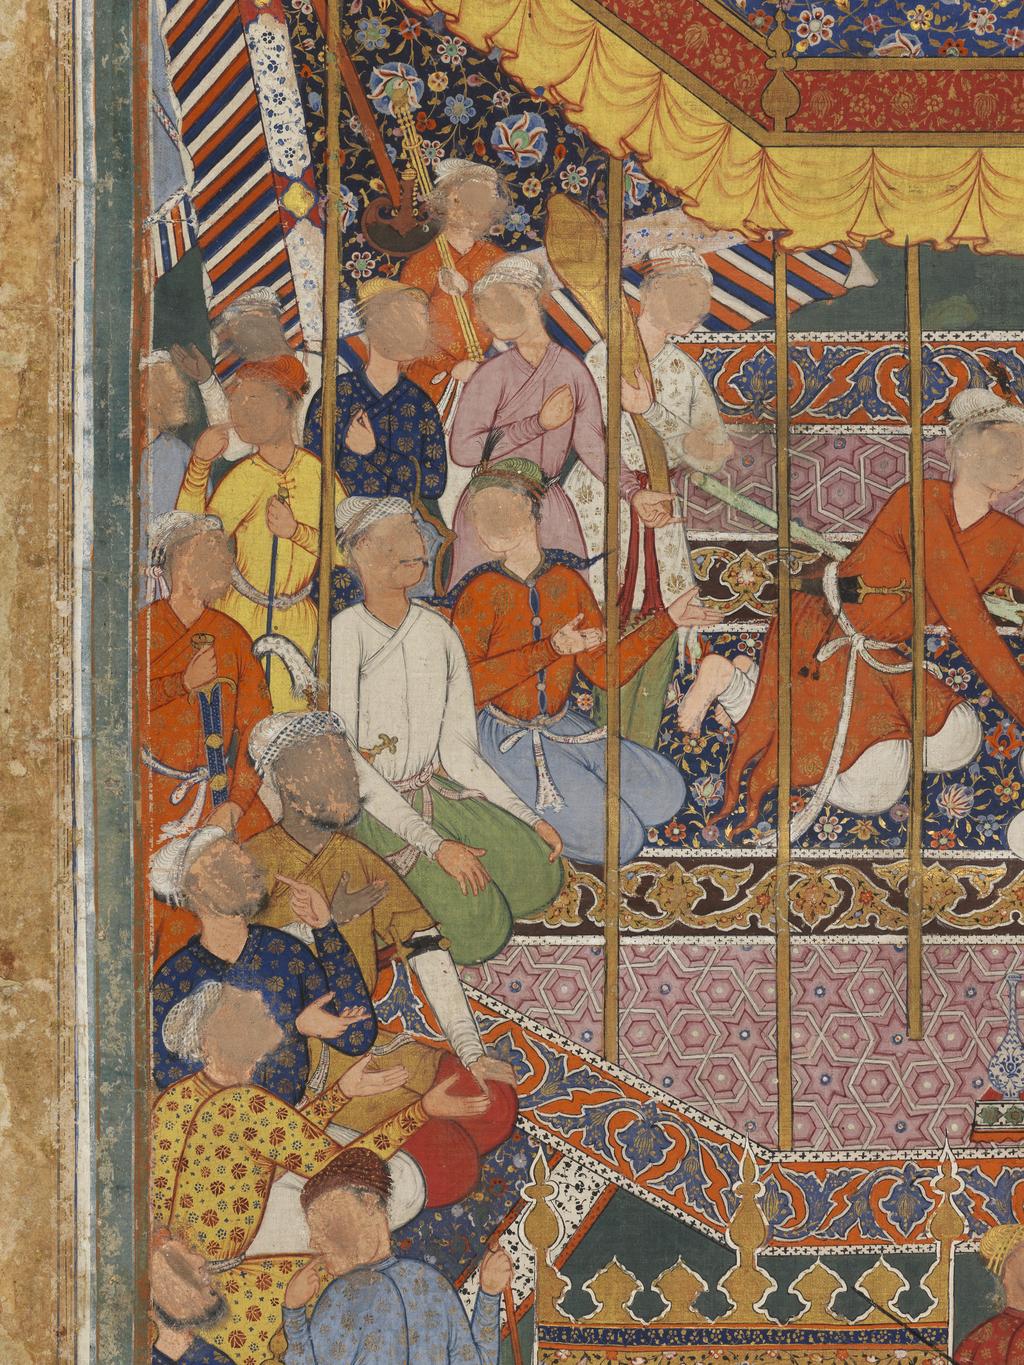 An image of Miniature. Illustration from the Hamza Nama. Two young men seated together in a pavilion, each with numerous attendants, disputing over a scroll of writing. Verso: Calligraphy. Bodycolour and watercolour on cotton, height 675 mm, width 512 mm. Mogul School. Production Note: Formerly 'Indo-Persian, c. 1555-1579'. Notes: The Hamza Nama, a manuscript of the Dastan i-Amir Hamzah (an Islamic romance), was begun for the Emperor Humayun, and completed after his death in 1556 for his successor Akbar. It was illustrated by fifty artists working in the Imperial library first under the Persian master Mir Sayyid 'Ali, and later under a second Persian, 'Abd al-Samad. Other illustrations from this very large work are known as follows: 61 in the Museum für Kunst und Industrie, Vienna 25 in the Victoria and Albert Museum 5 in the British Museum 17 in various collections in the USA For further notes see the filing box. Acquisition Credit: National Art Collections Fund.